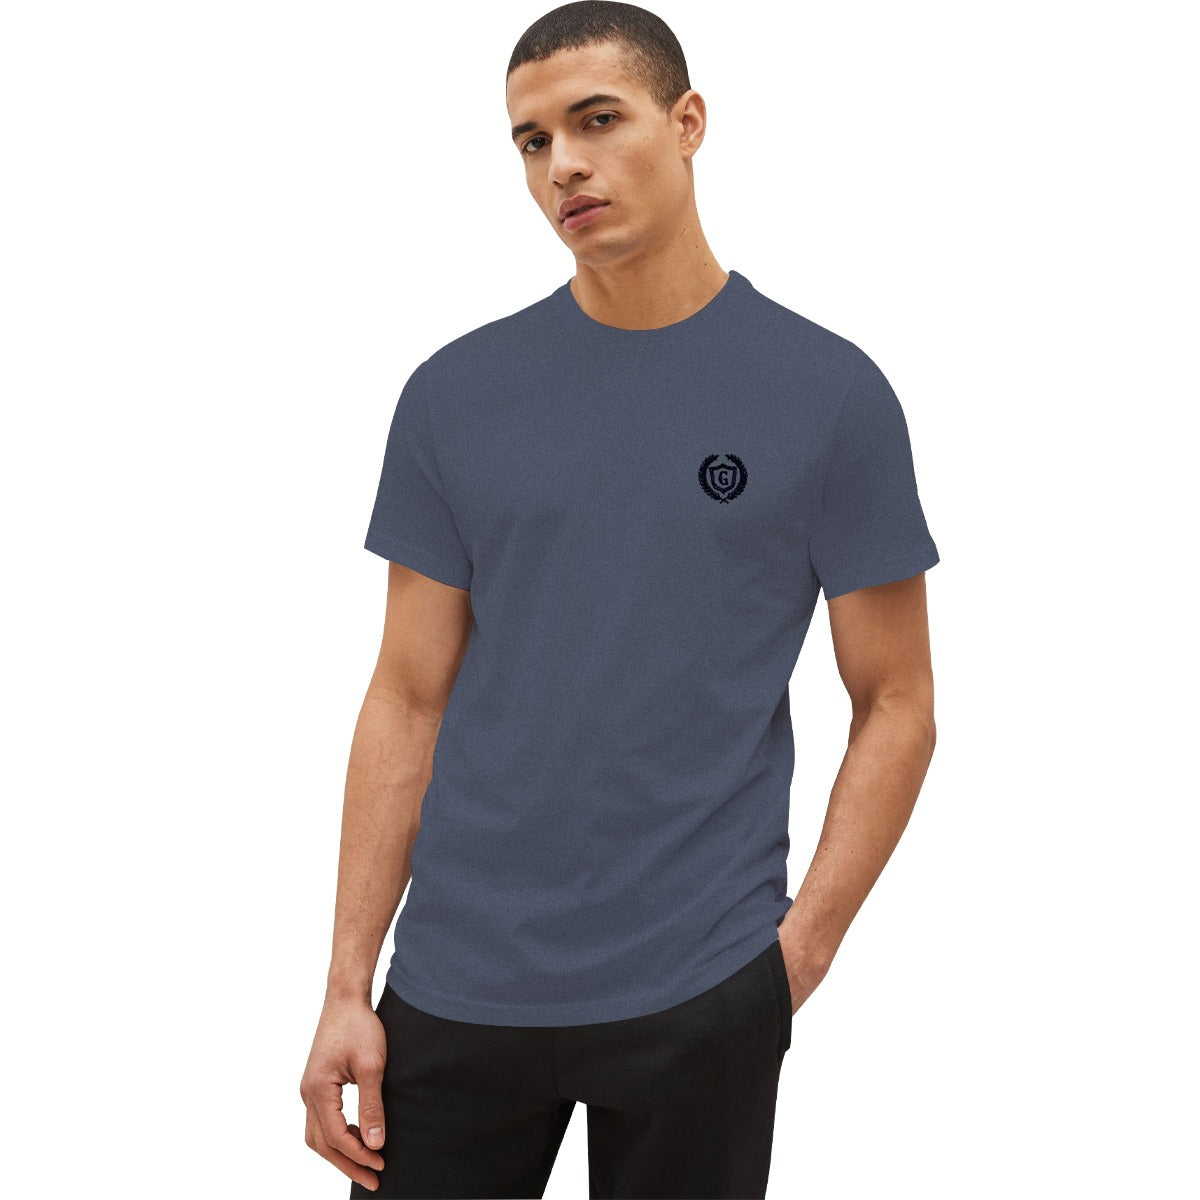 HG SIGNATURE EMBROIDERED MUST HAVE TEE SHIRT